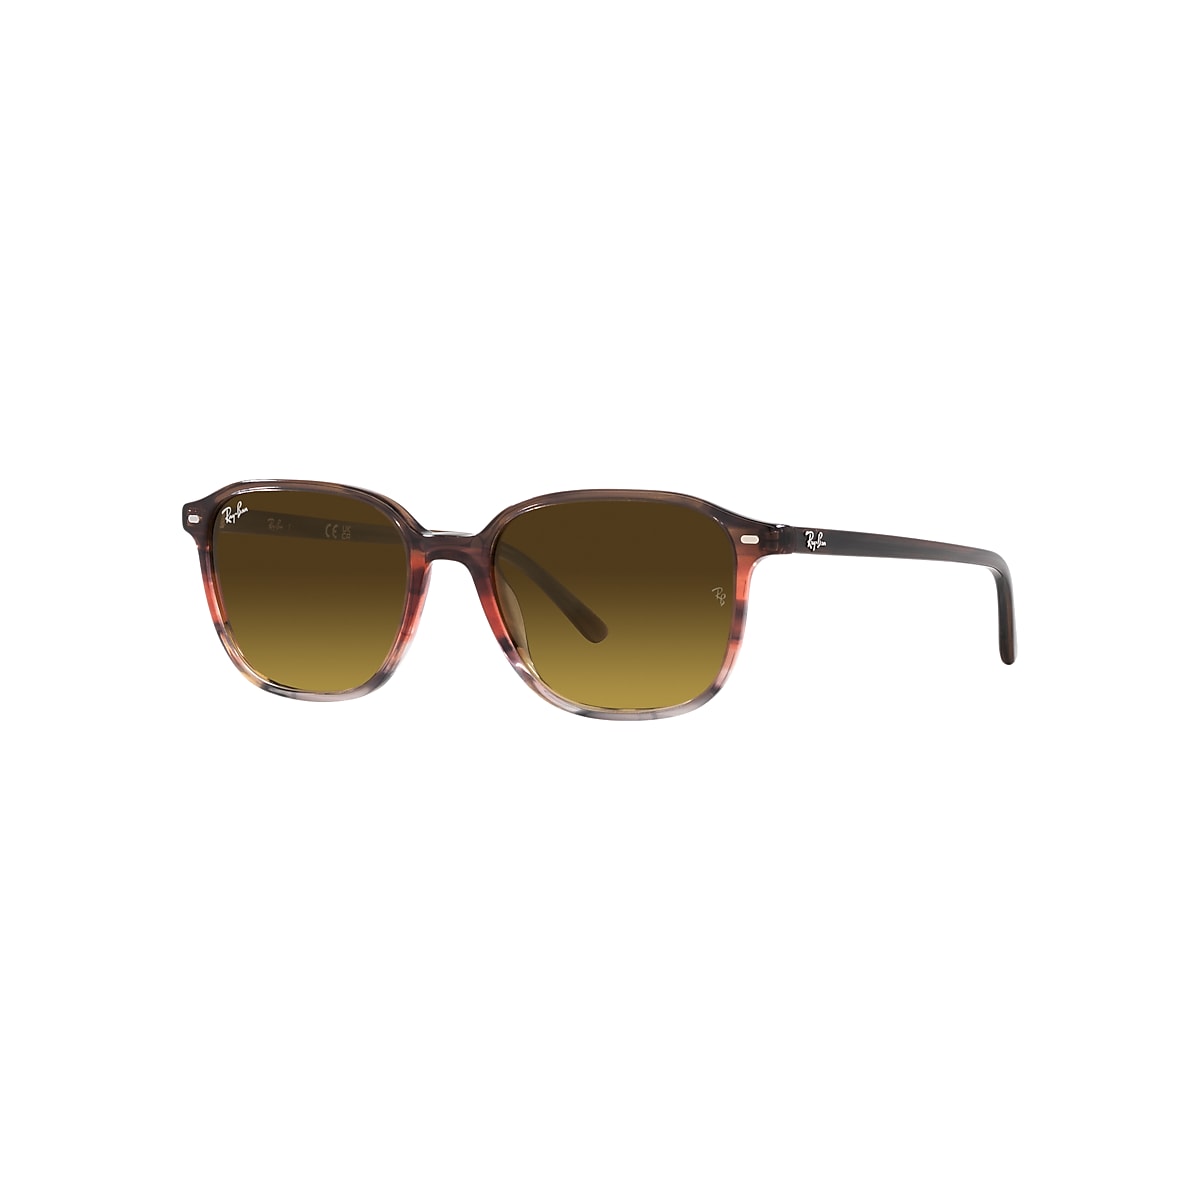 LEONARD Sunglasses in Striped Brown & Red and Brown - Ray-Ban